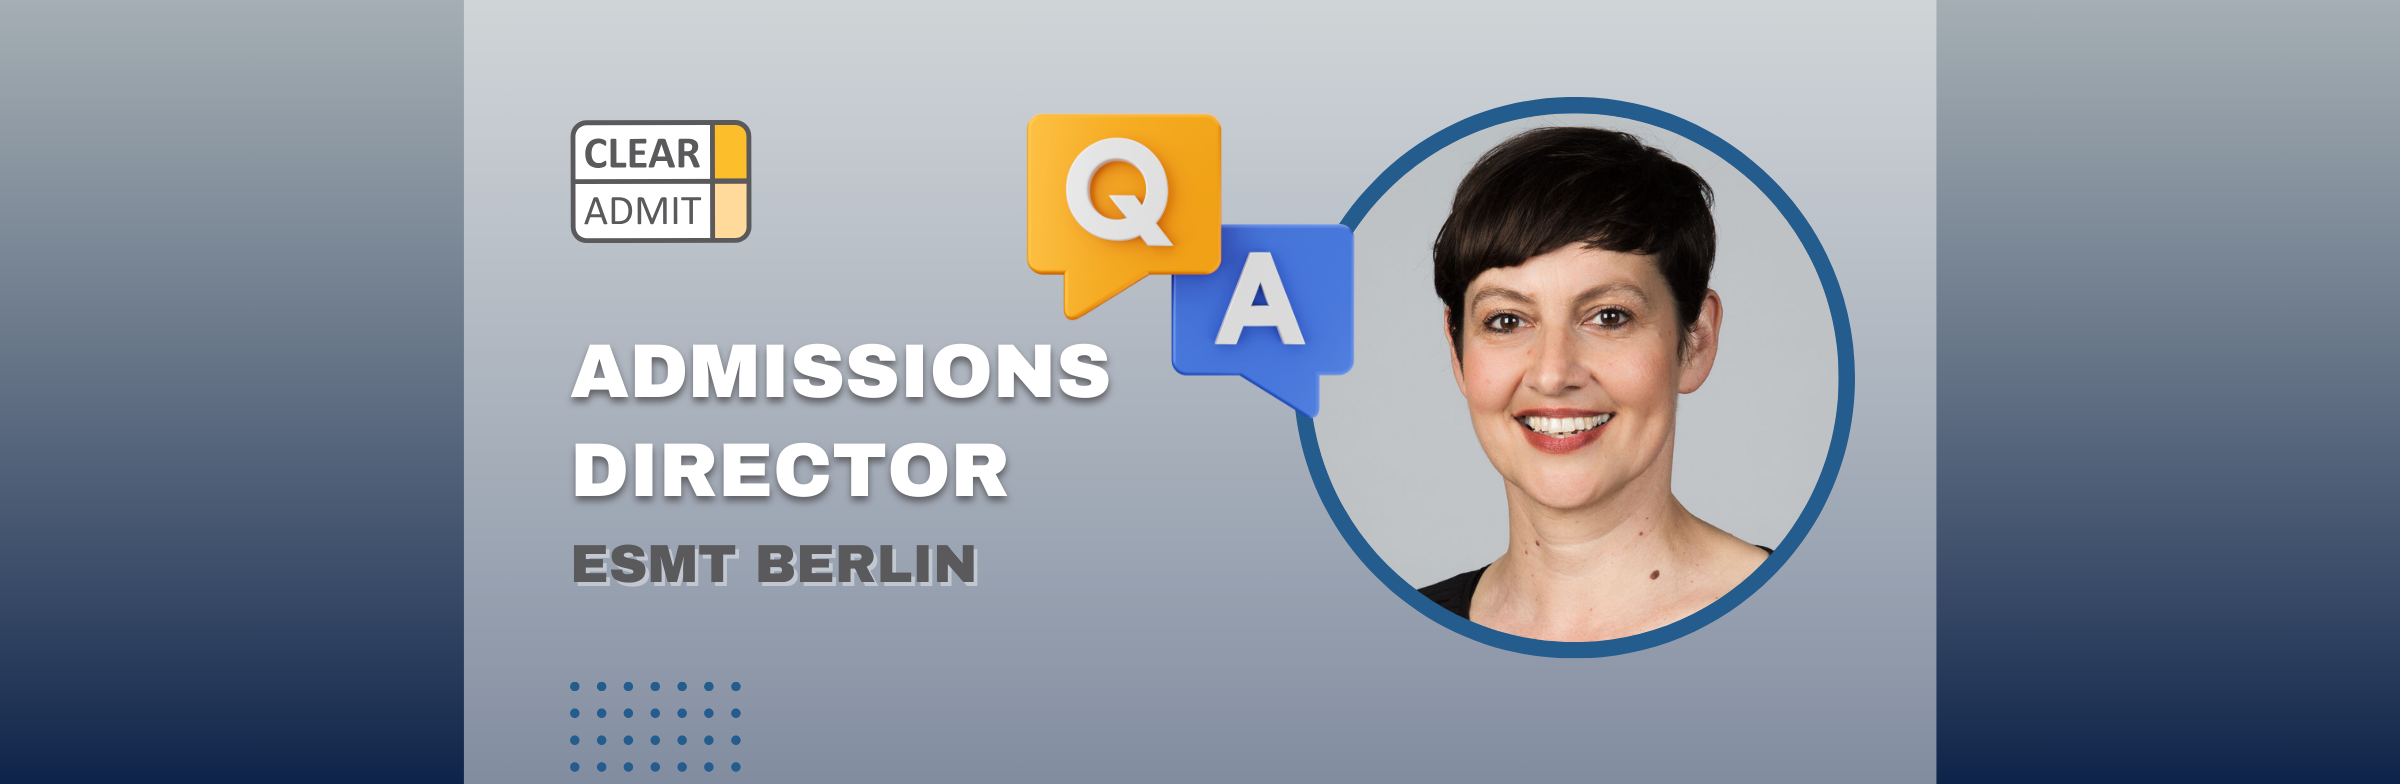 Image for Admissions Director Q&A: Stephanie Kluth of ESMT Berlin